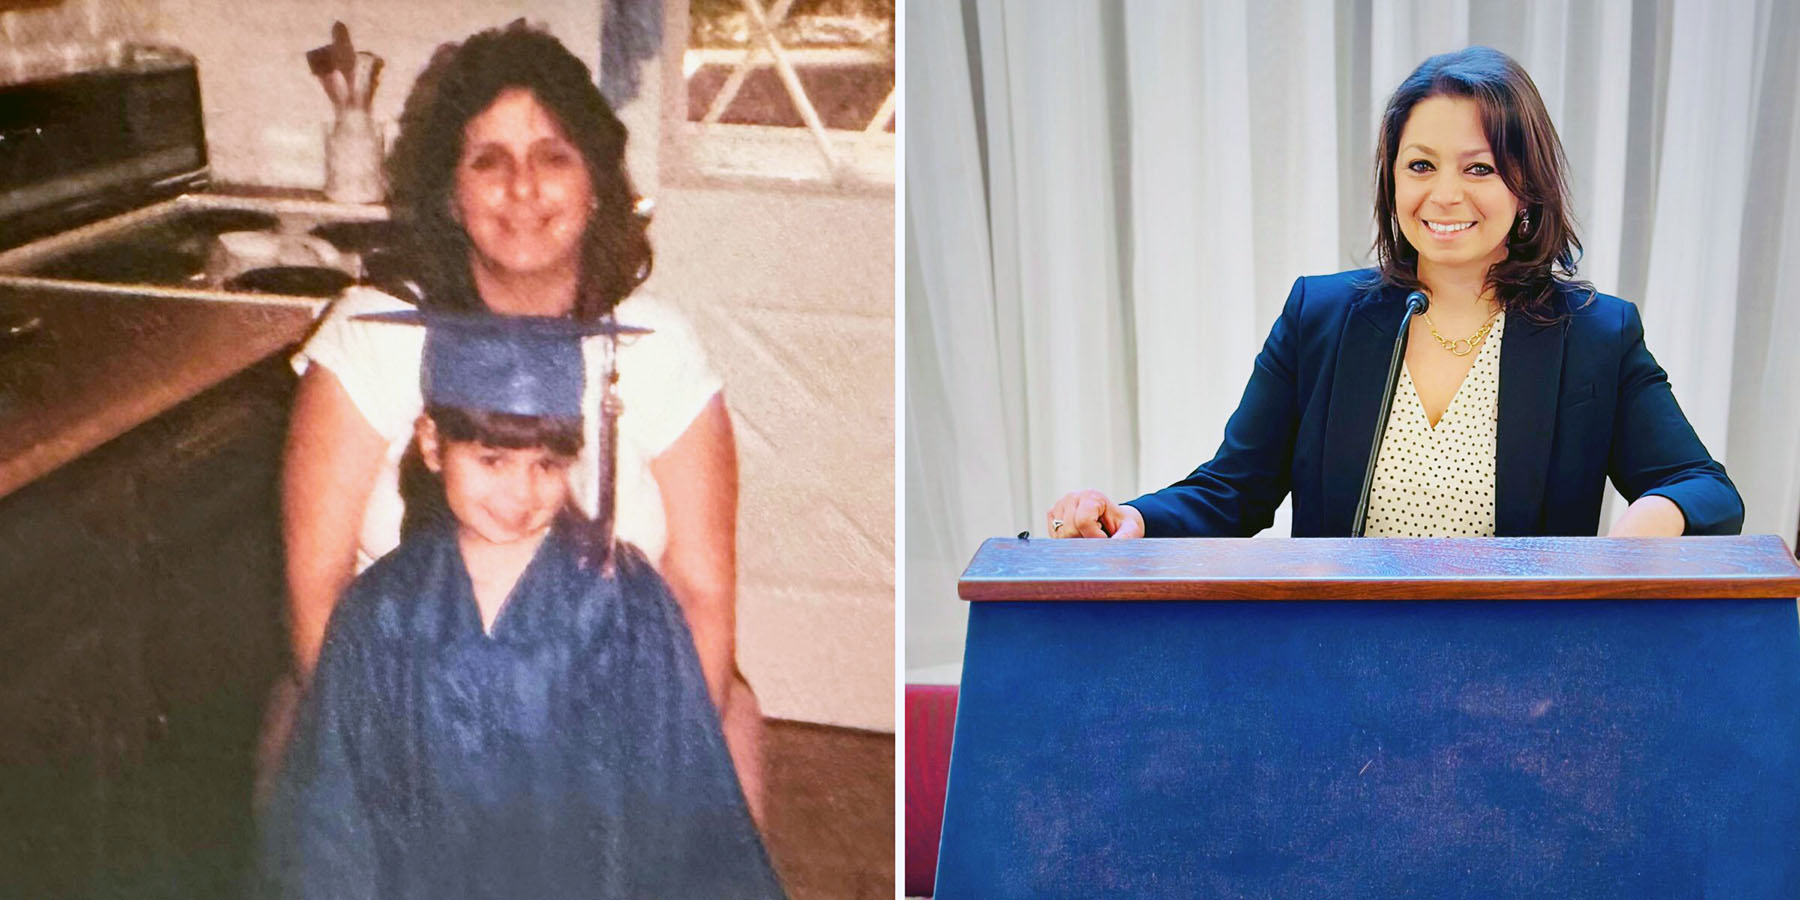 Side-by-side photos. On the left is a young Chris Cipriano in a graduation uniform standing in front of an adult woman. On the right is Cipriano, standing in front of a podium and mic.